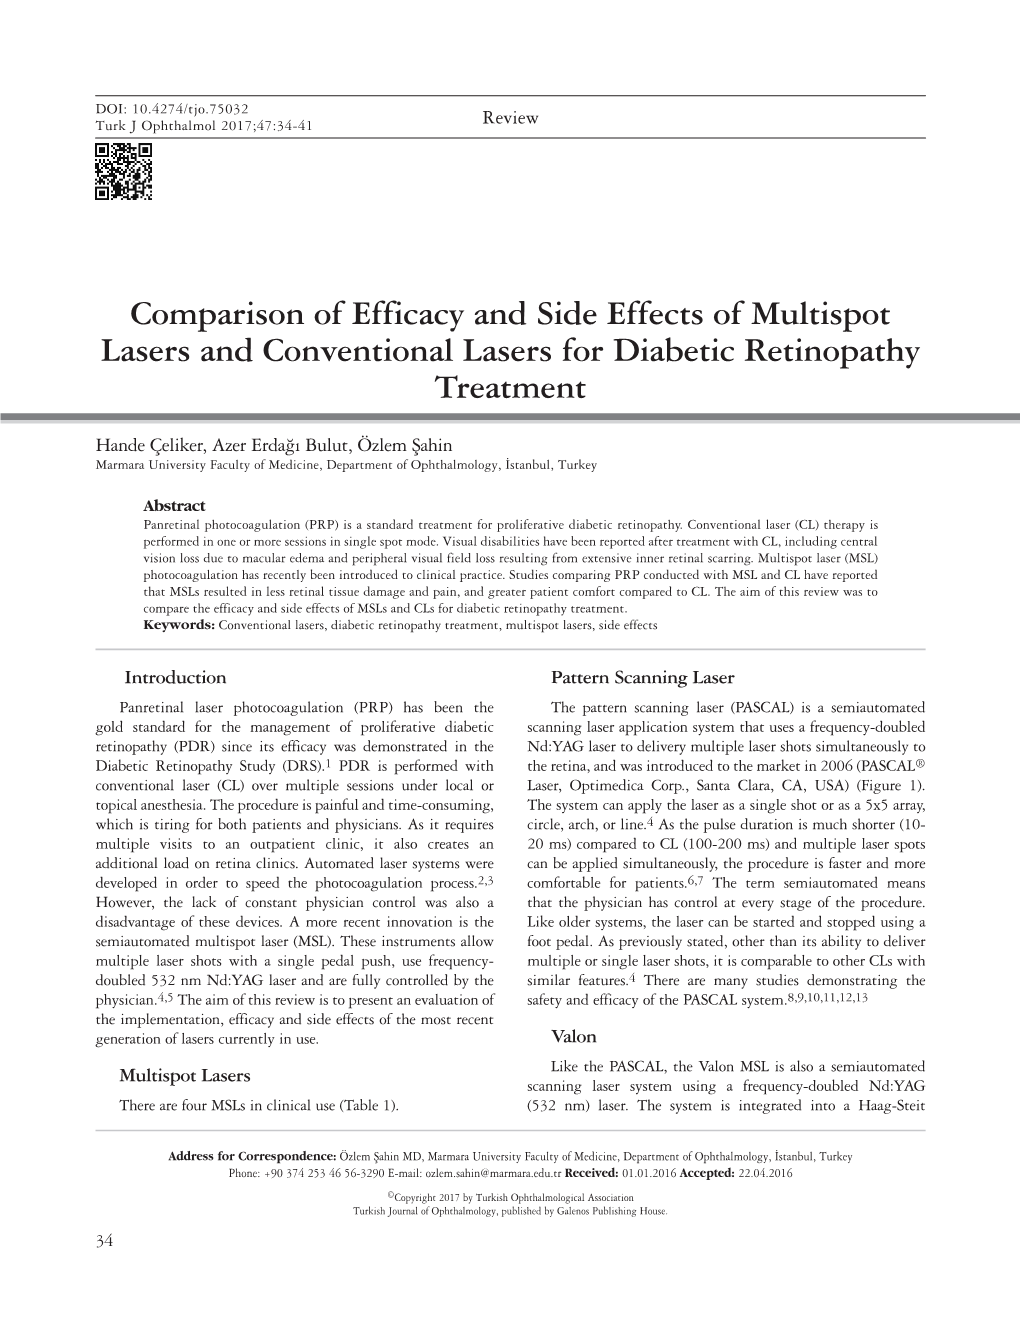 Comparison of Efficacy and Side Effects of Multispot Lasers and Conventional Lasers for Diabetic Retinopathy Treatment